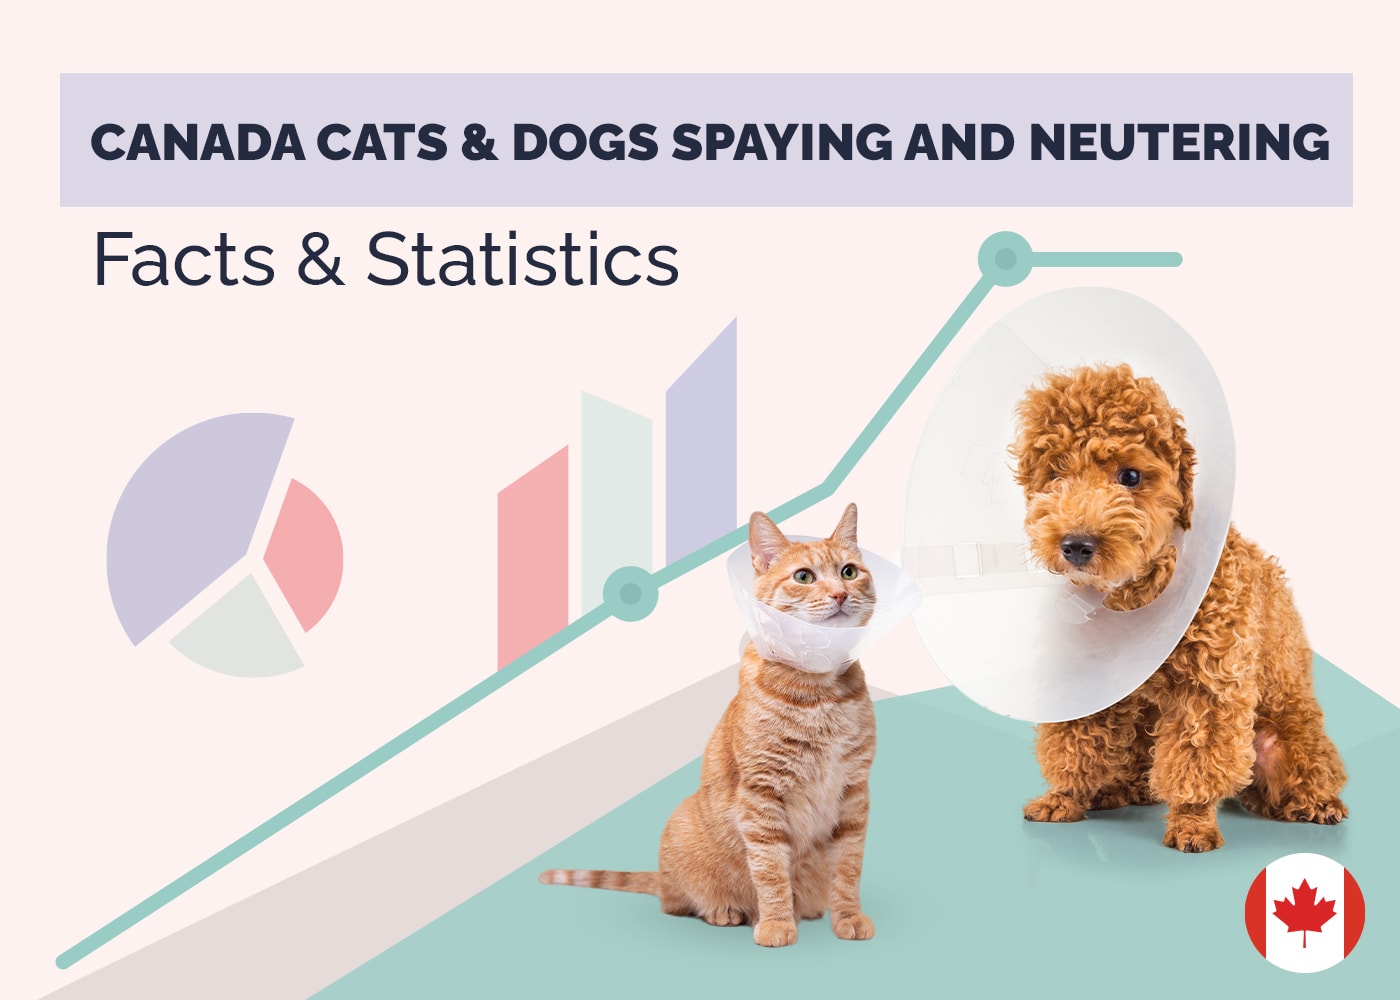 Canada Cat & Dog Spaying and Neutering Facts & Statistics